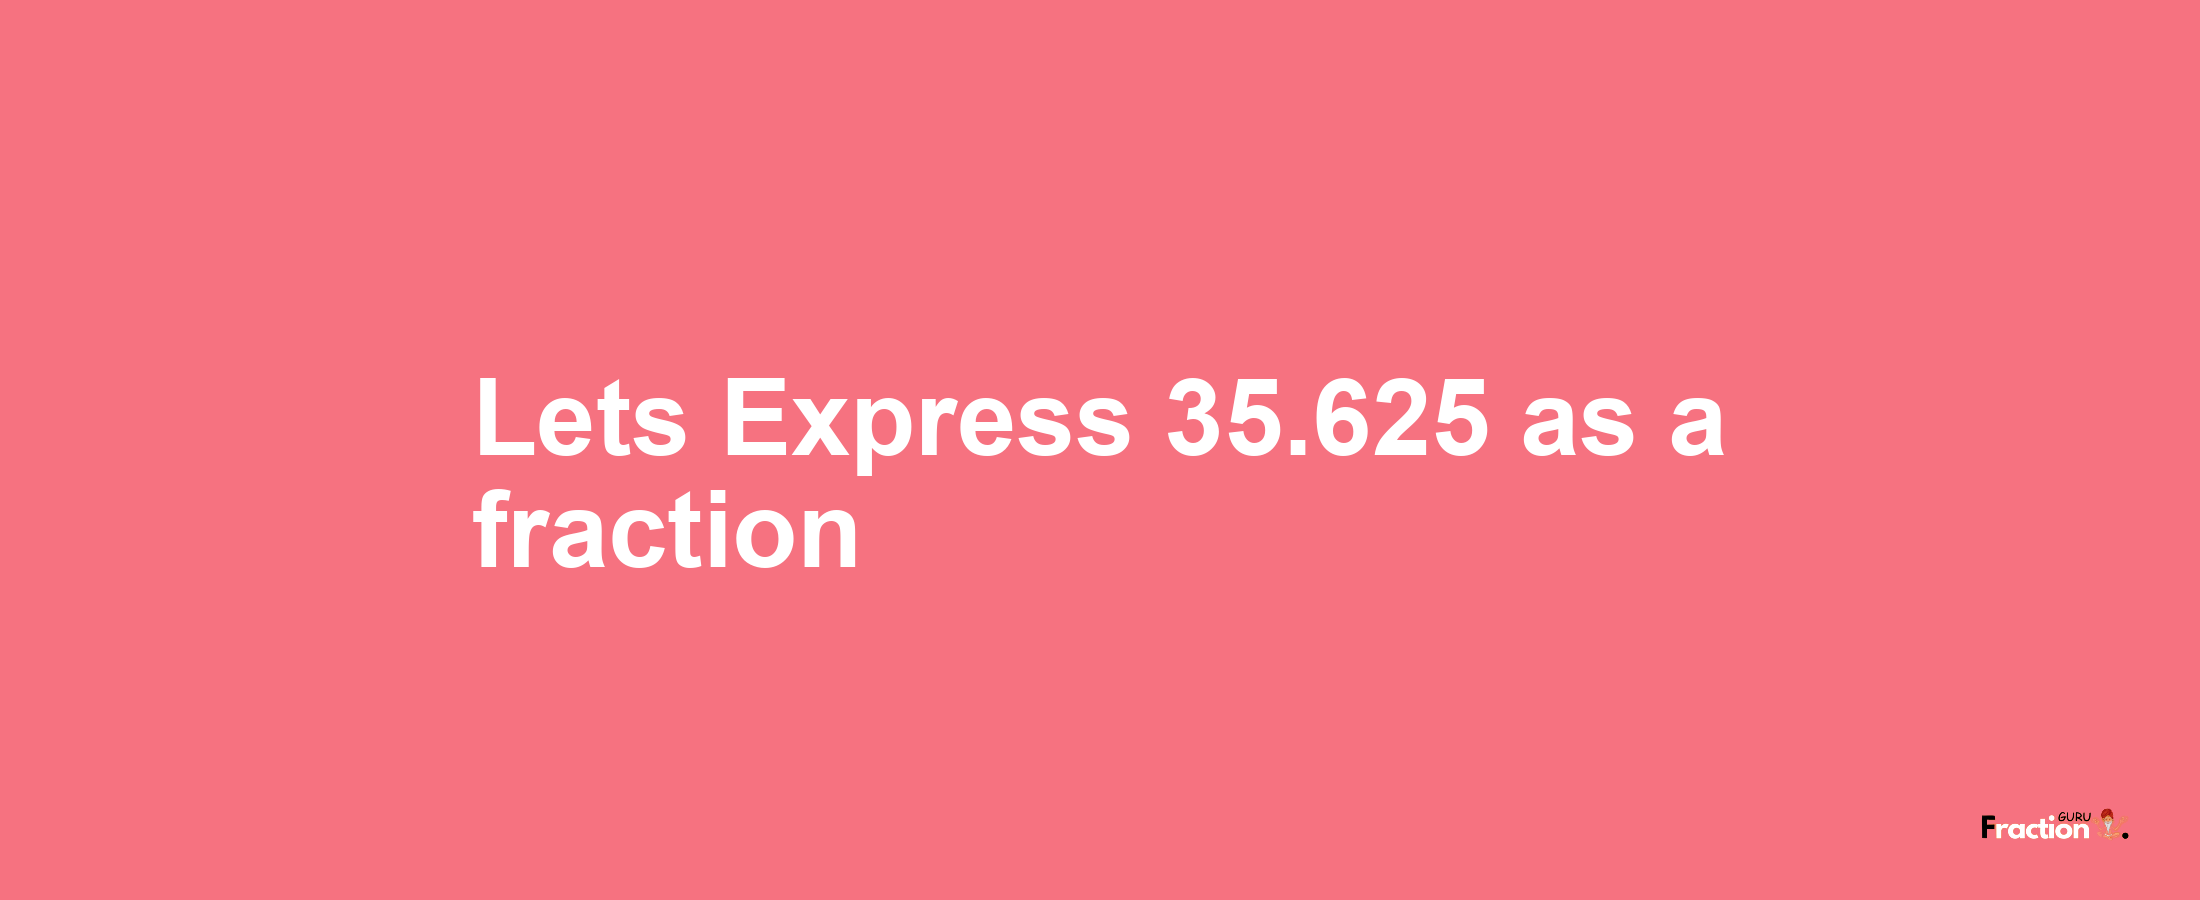 Lets Express 35.625 as afraction